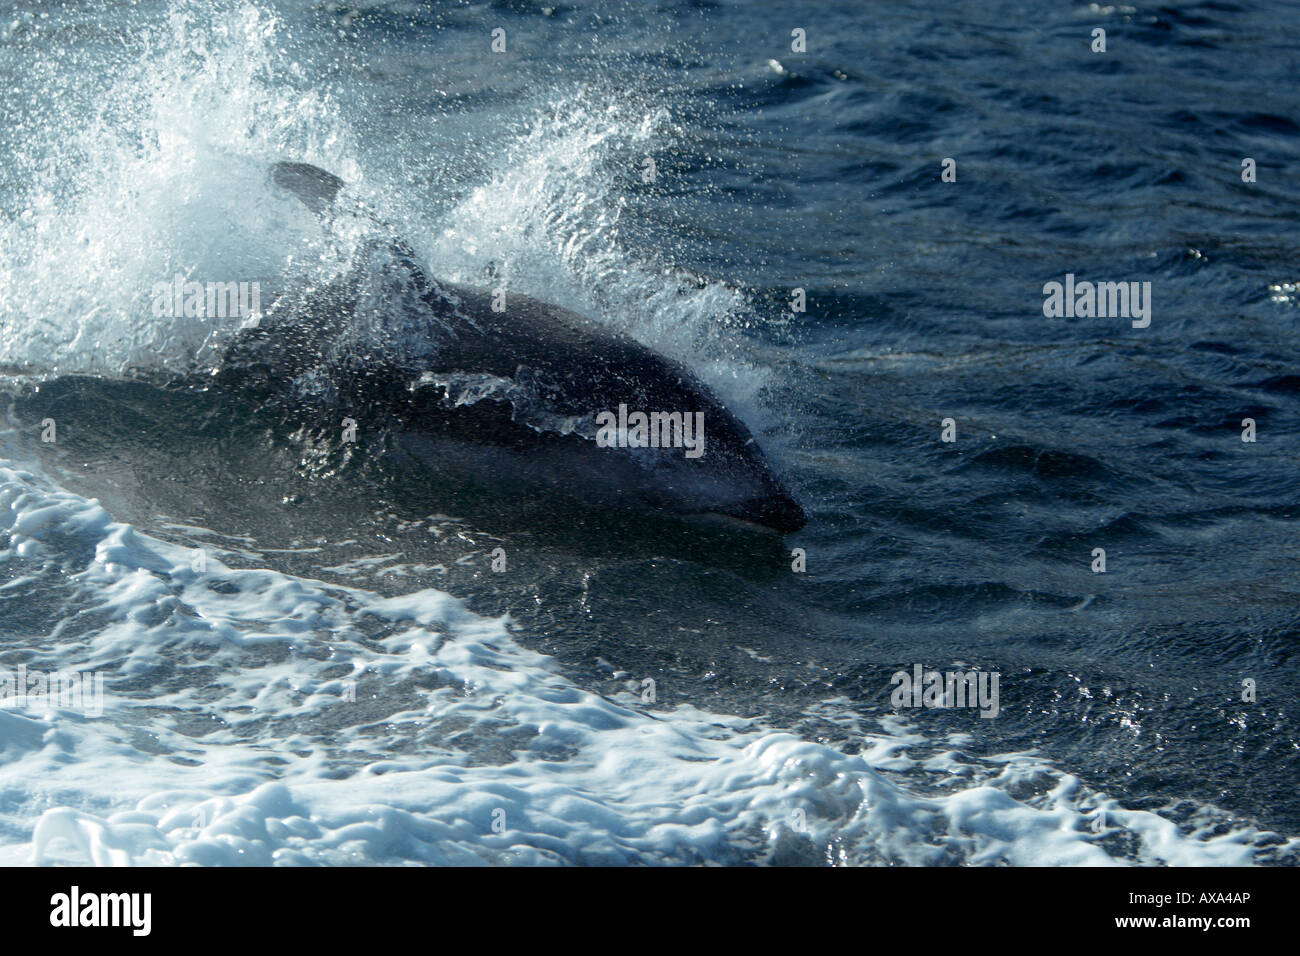 A Pacific white-sided dolphin plays in the white foam wake of a passing outboard boat. Stock Photo